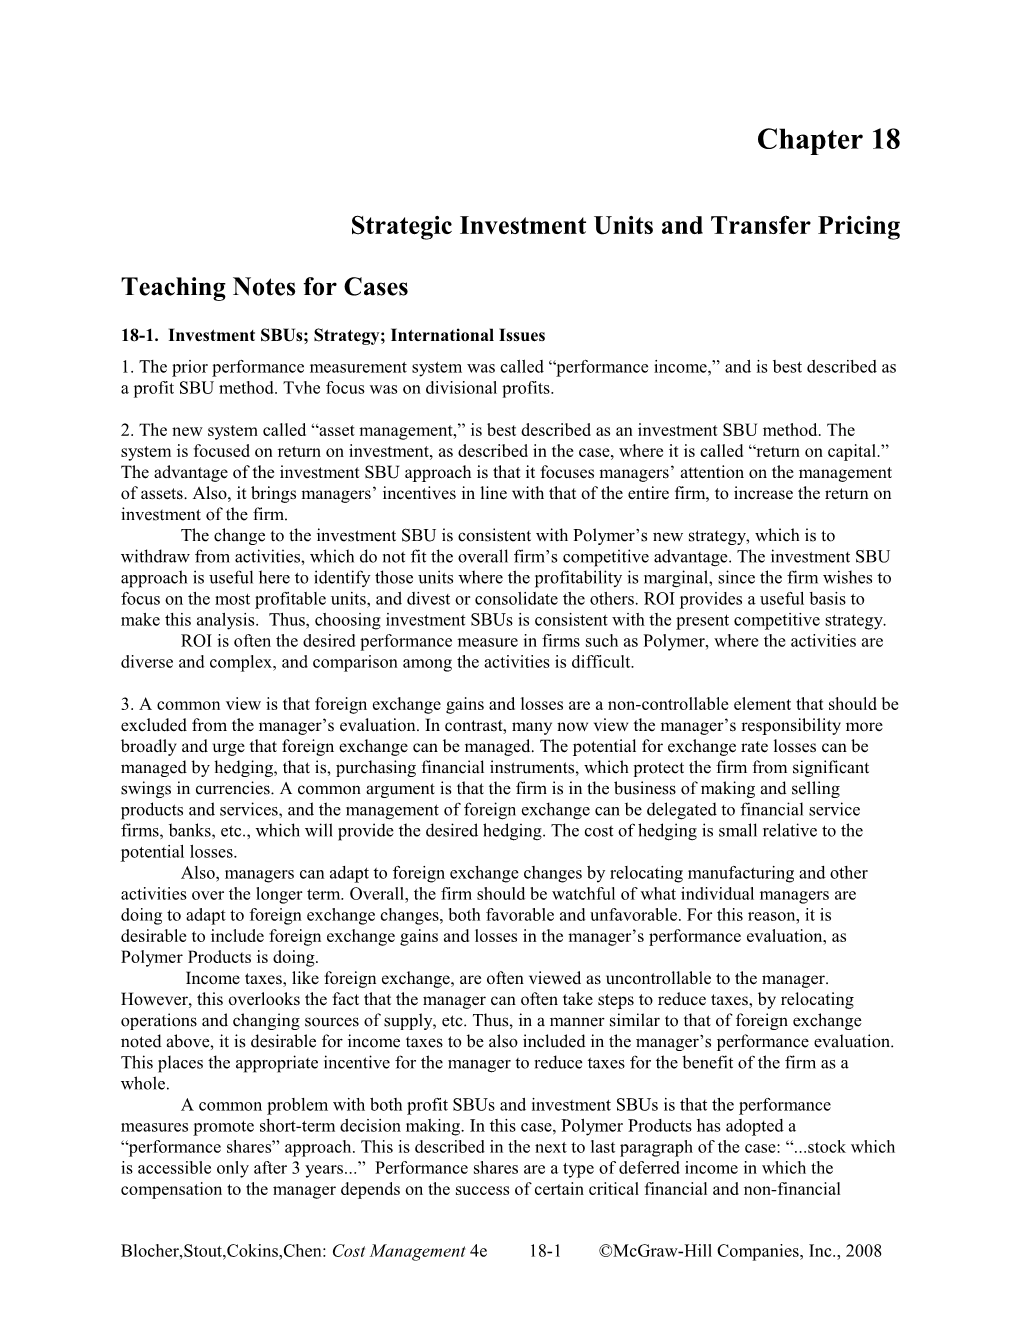 Strategic Investment Units and Transfer Pricing